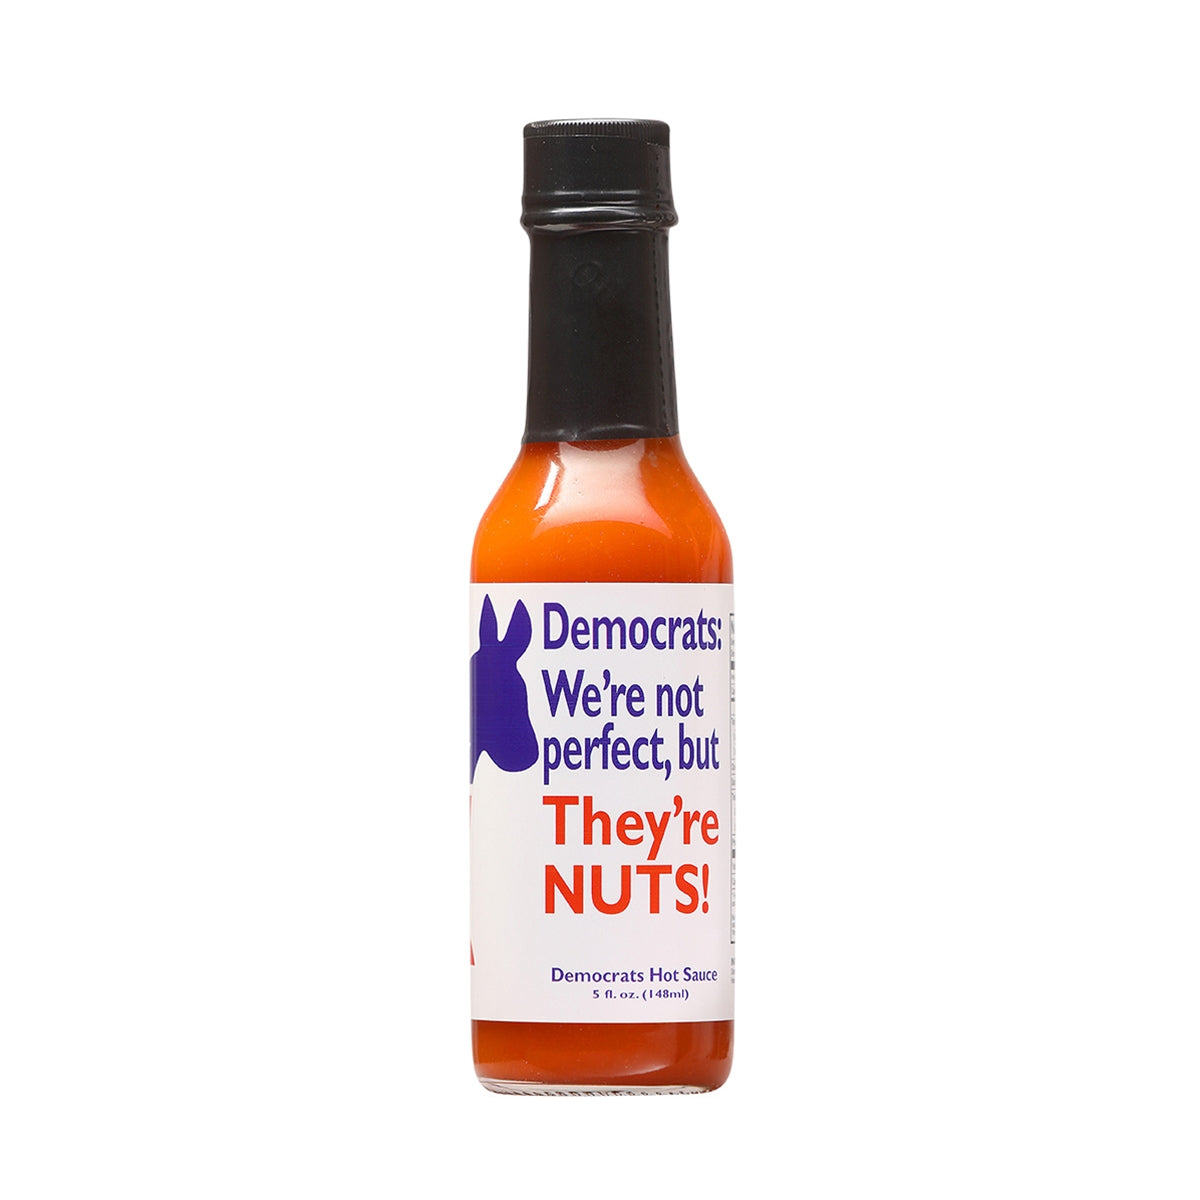 Hot Sauce Democrats We're not perfect, but They're NUTS! 5 oz Heat 6 Political